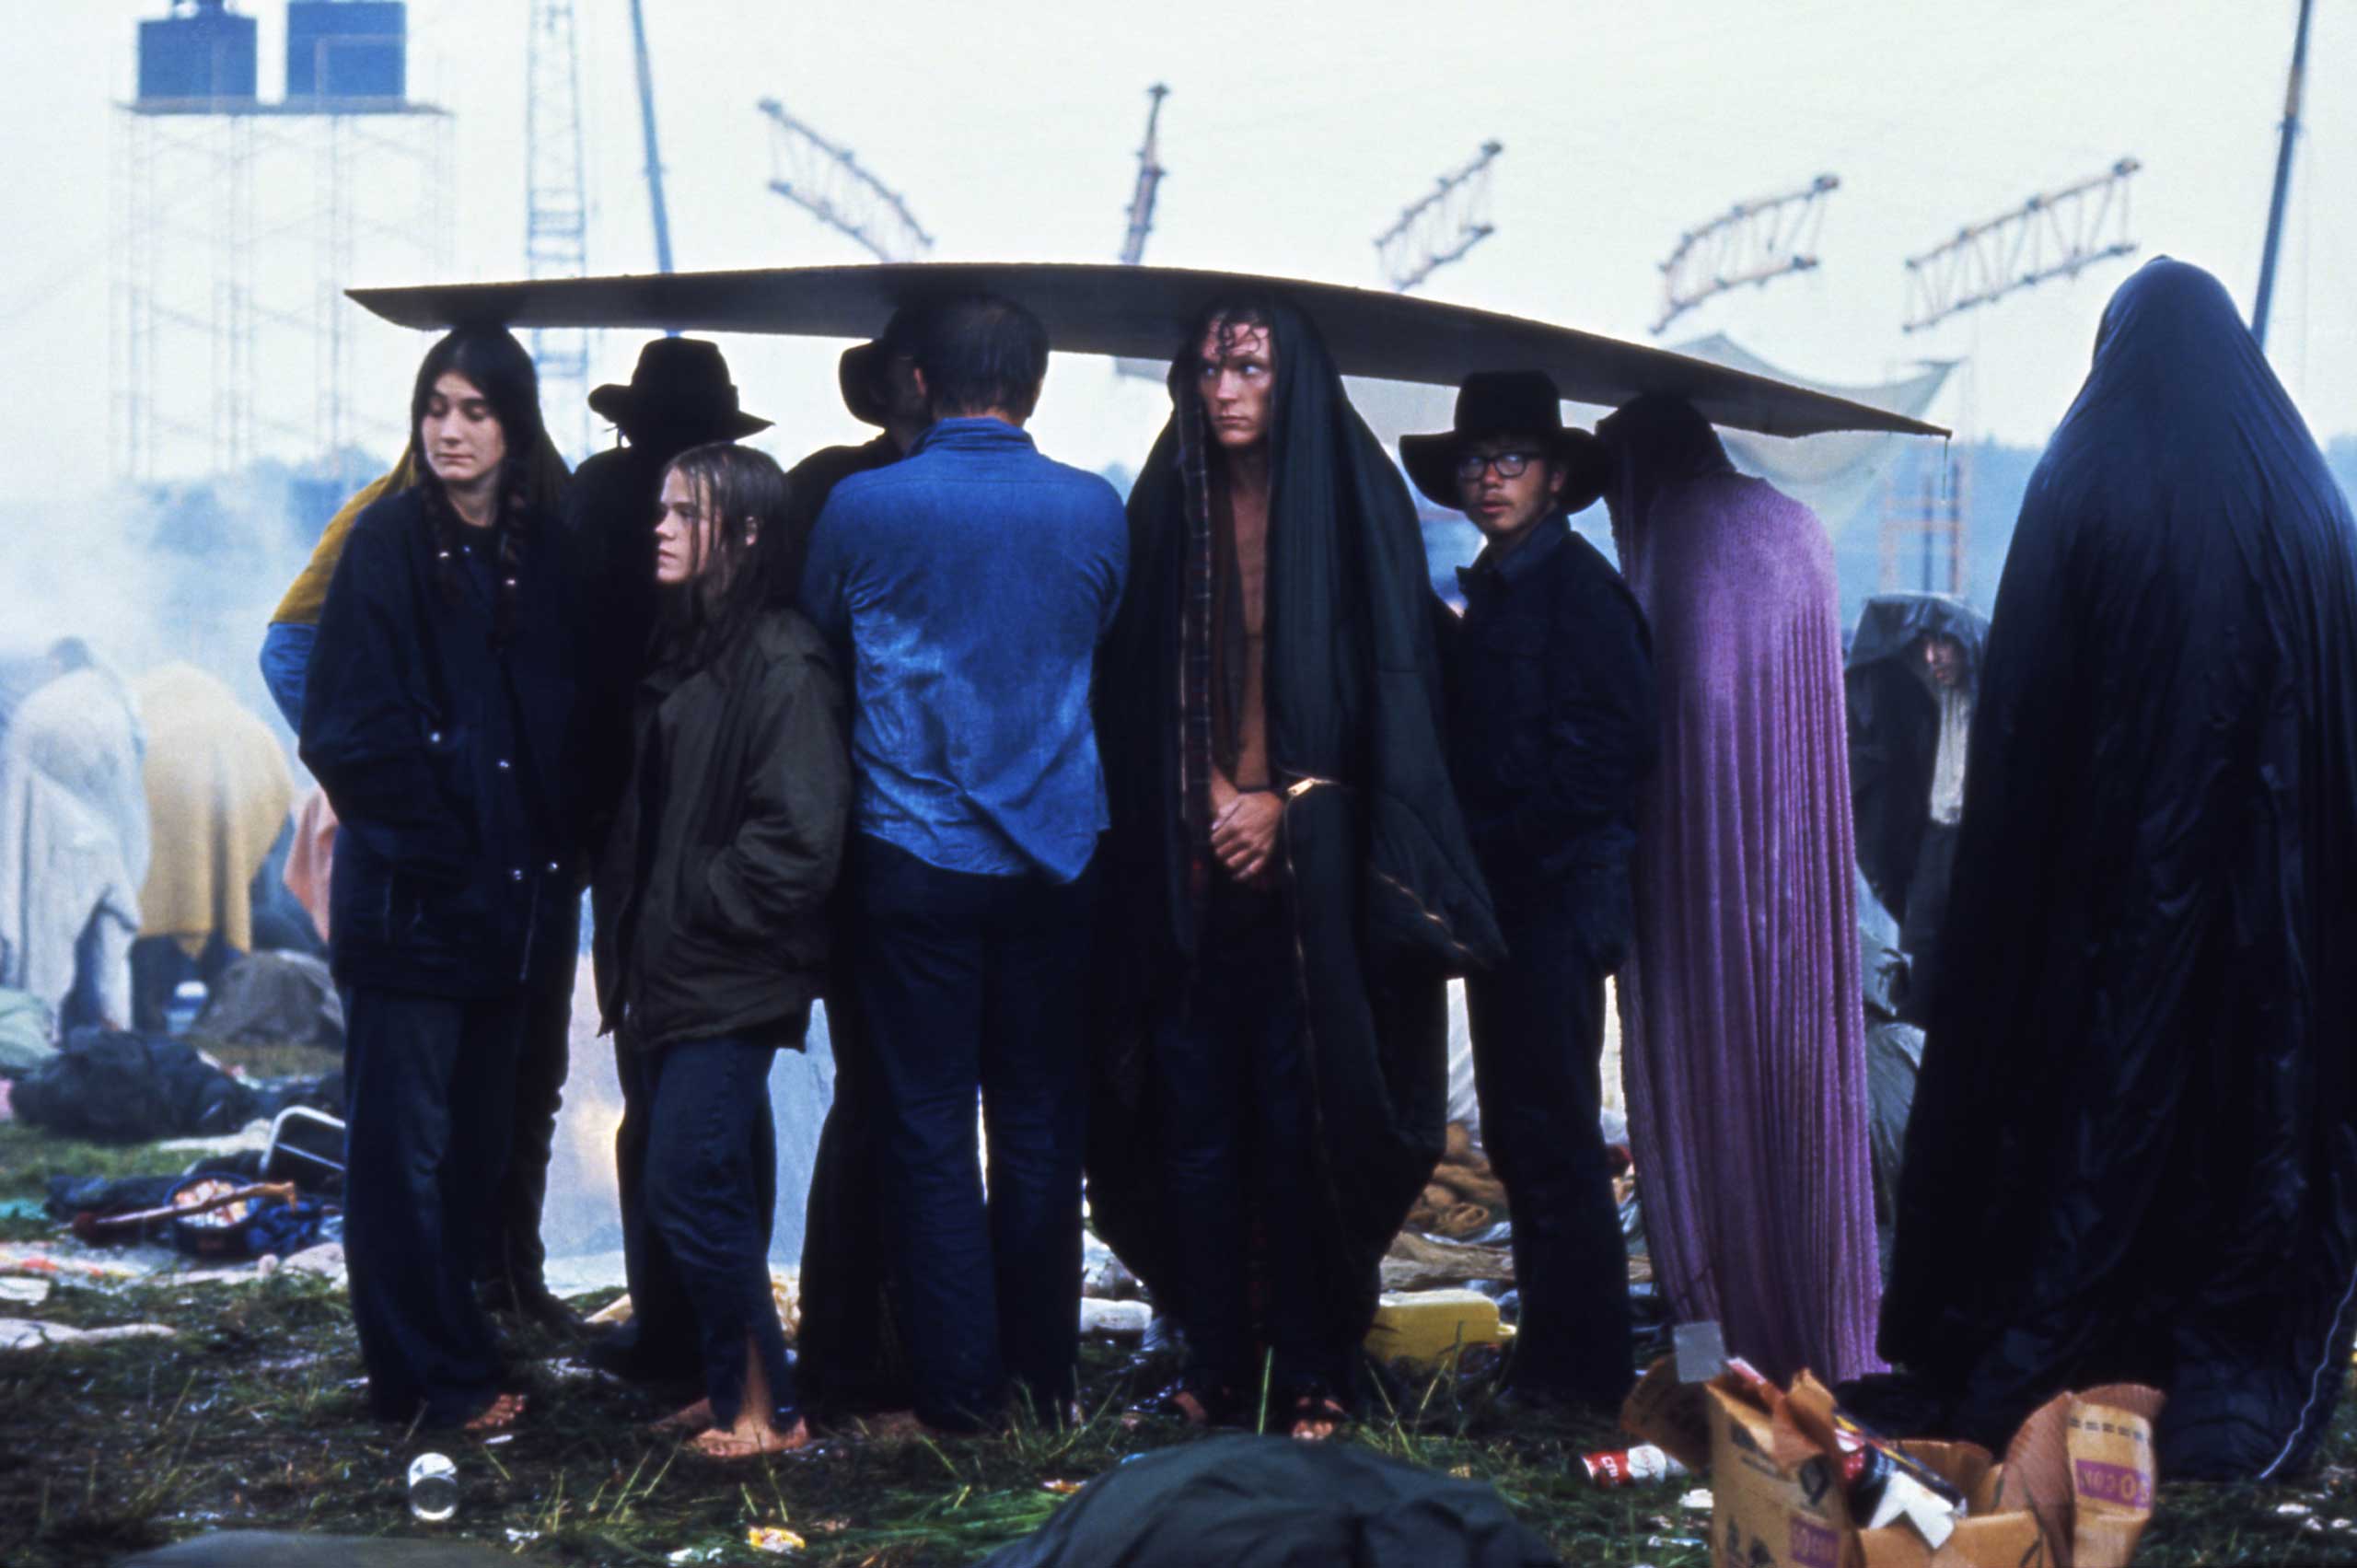 1969 | Concert-goers huddle under a sheet of cardboard in the rain at the three-day, era-defining Woodstock Music and Art Fair in Bethel, New York. Originally published in the August 29, 1969, issue of LIFE.